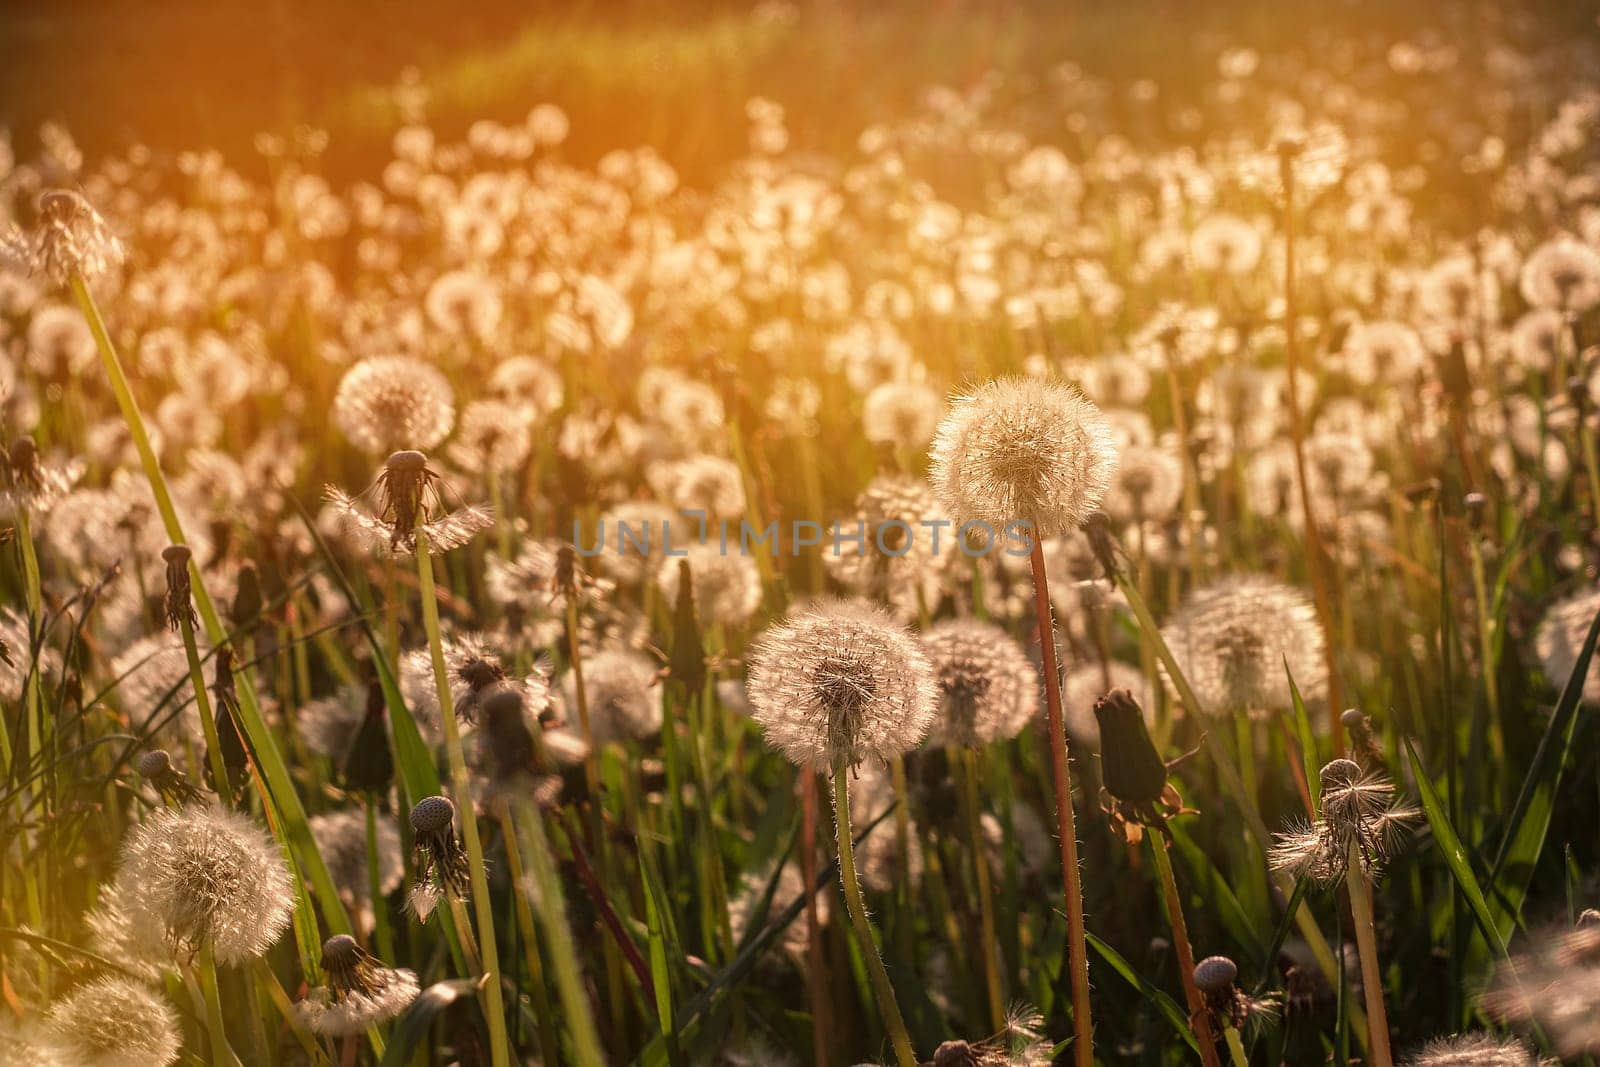 Fluffy dandelions glow in the rays of sunlight at sunset in the field by Annavish